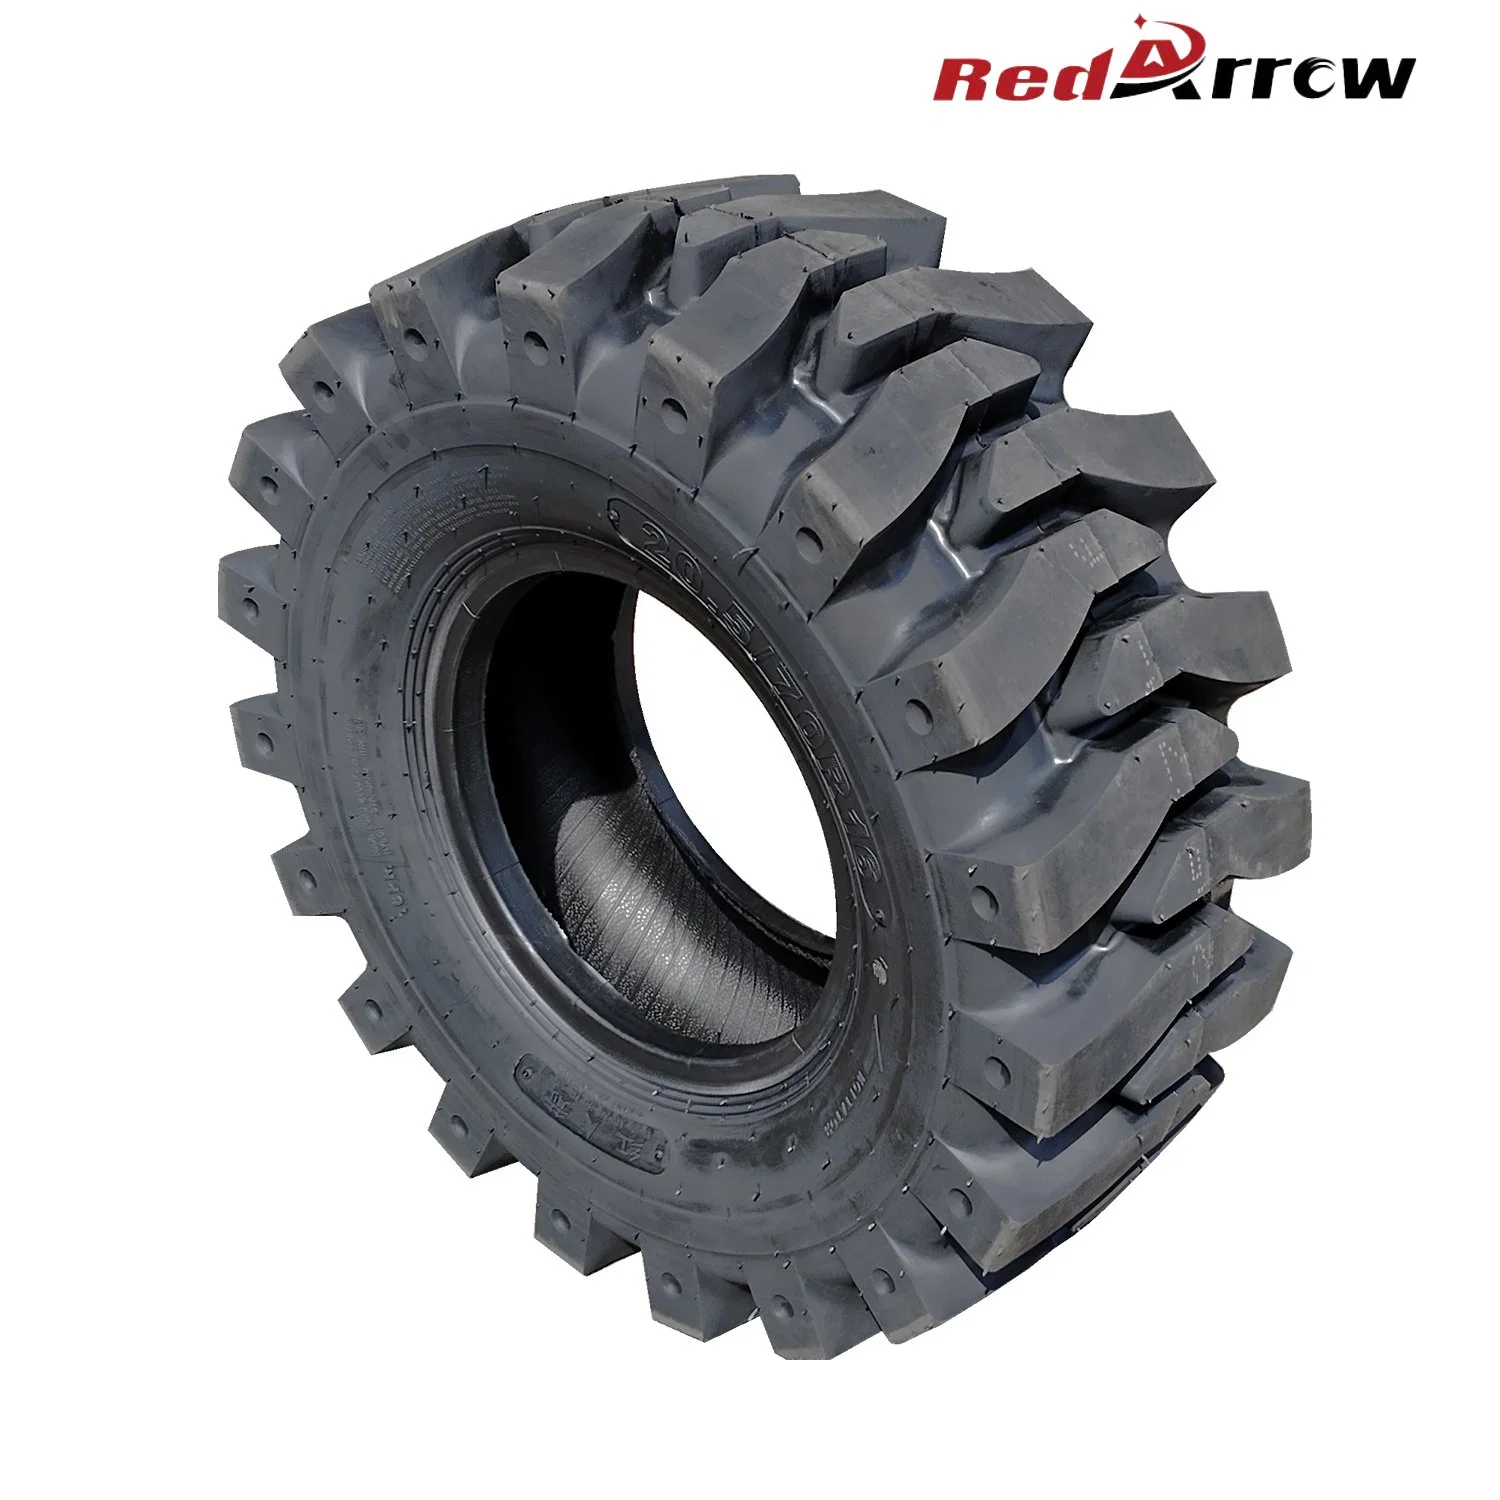 China Factory Semi Solid High Performance Skid Steer Loader Industrial Tire/Tyre